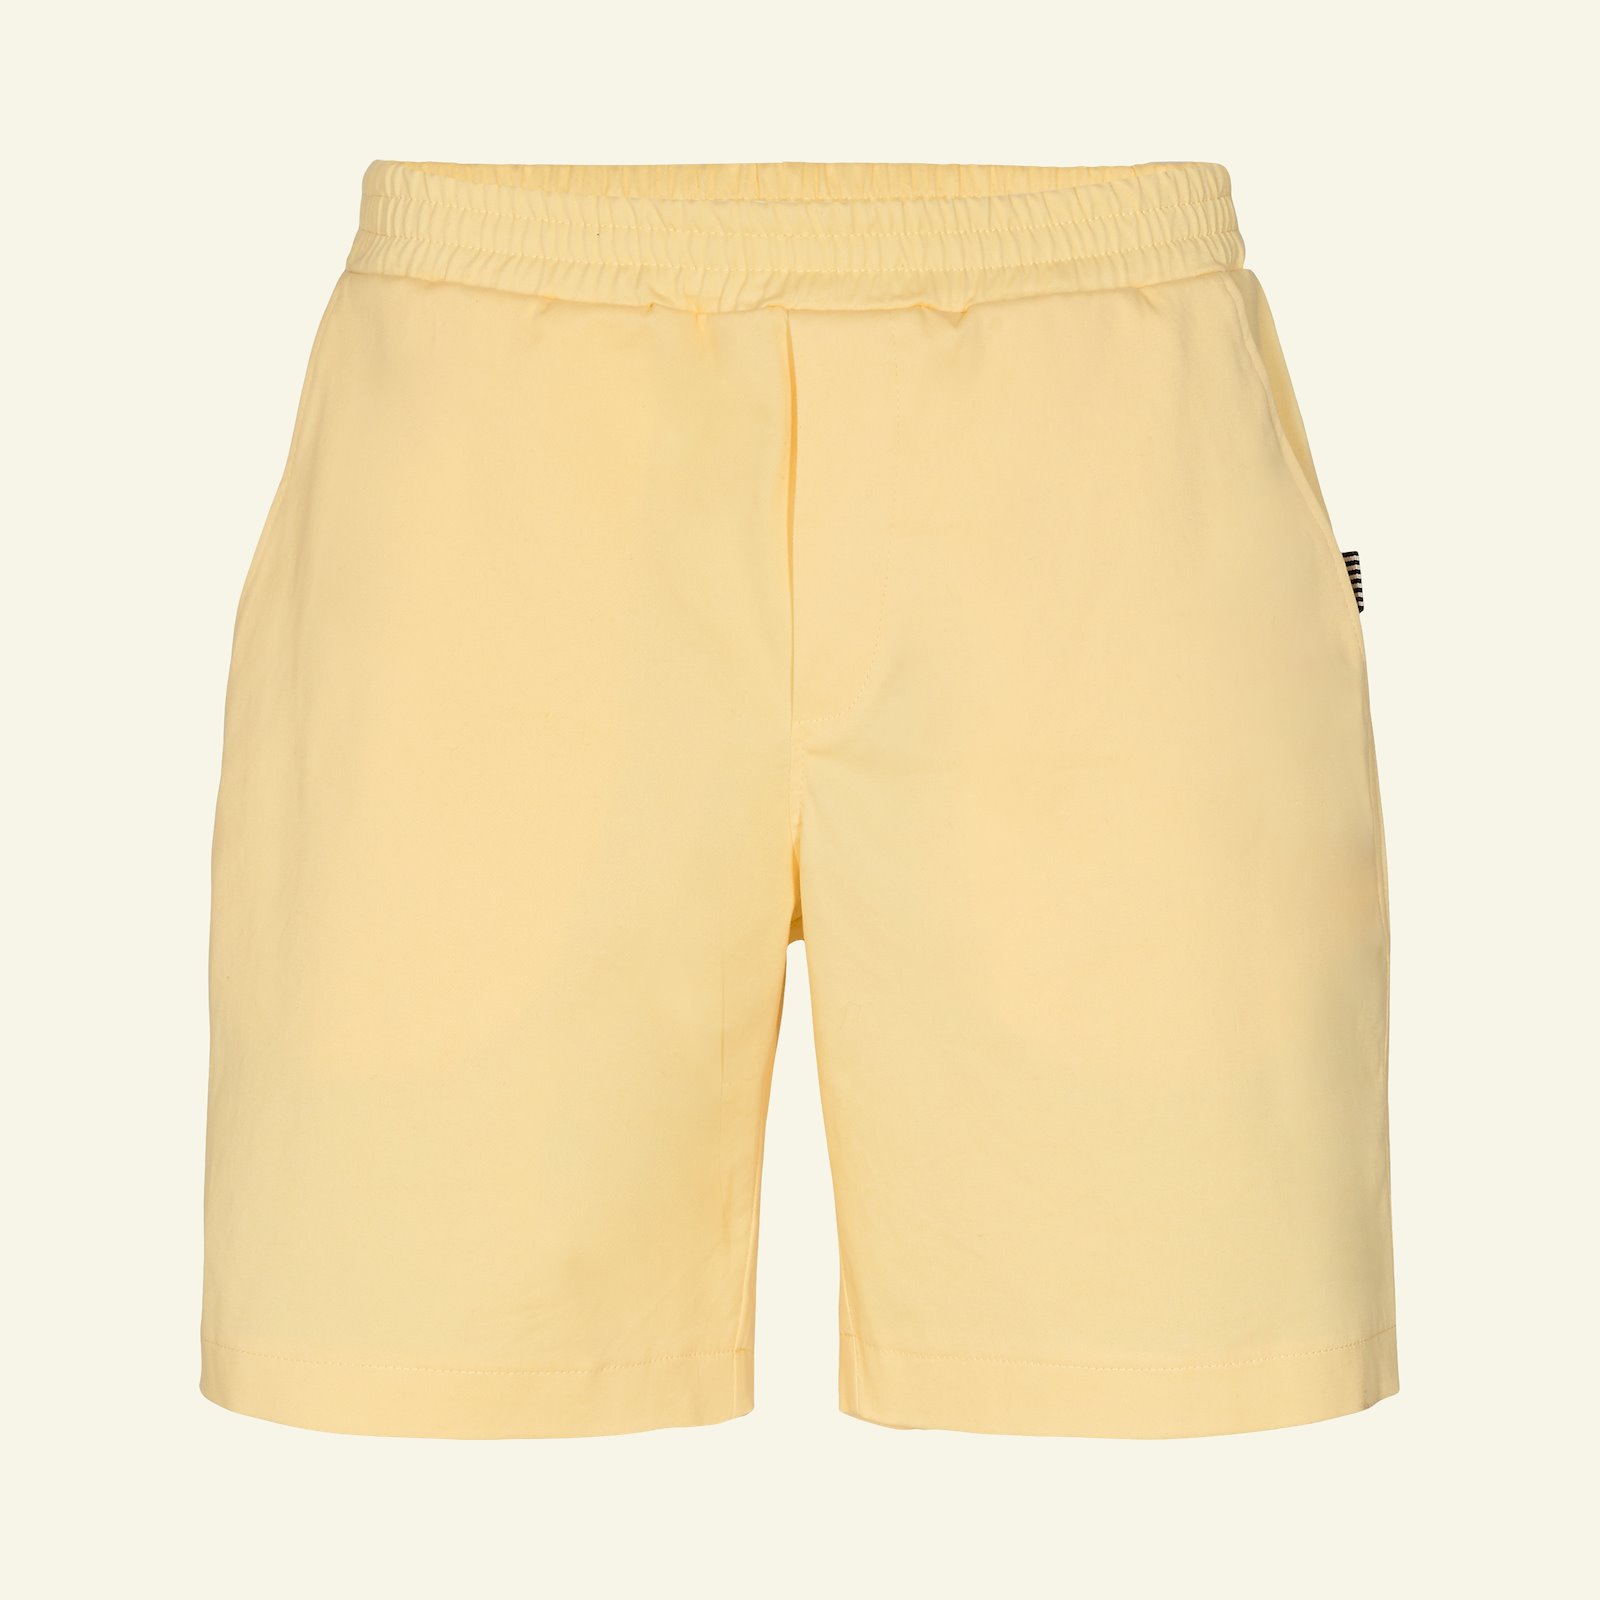 Woven stretch twill washed yellow p85002_420416_3504001_21330_sskit